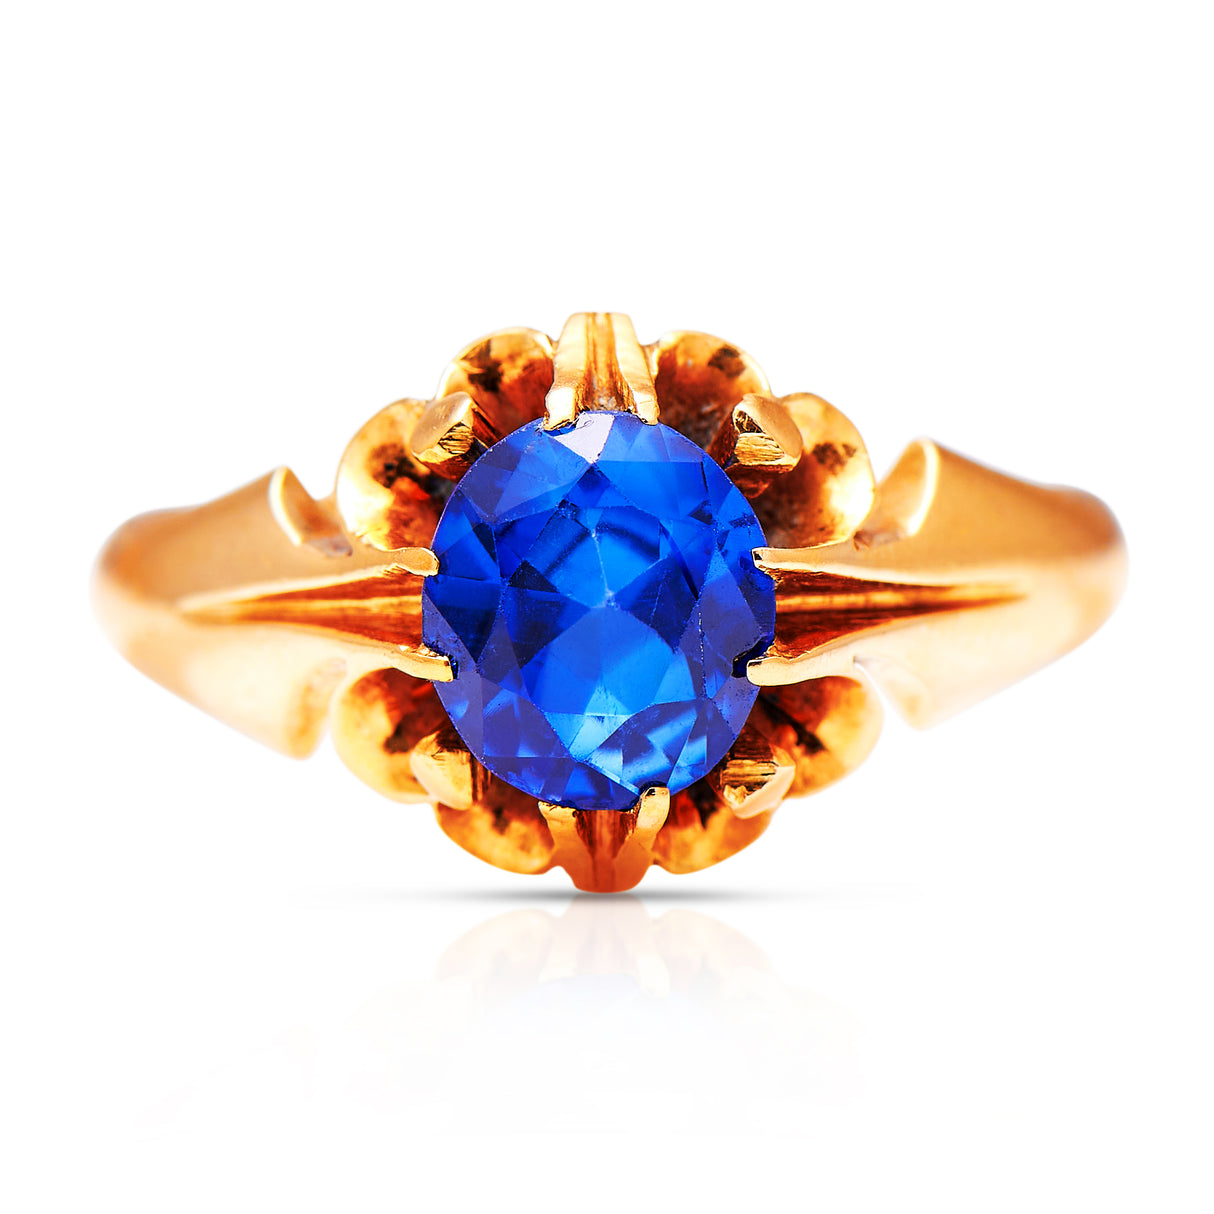 Victorian-Enagement-Antique-Ring-Sapphire-18ct-Gold-Ornate-Detailed